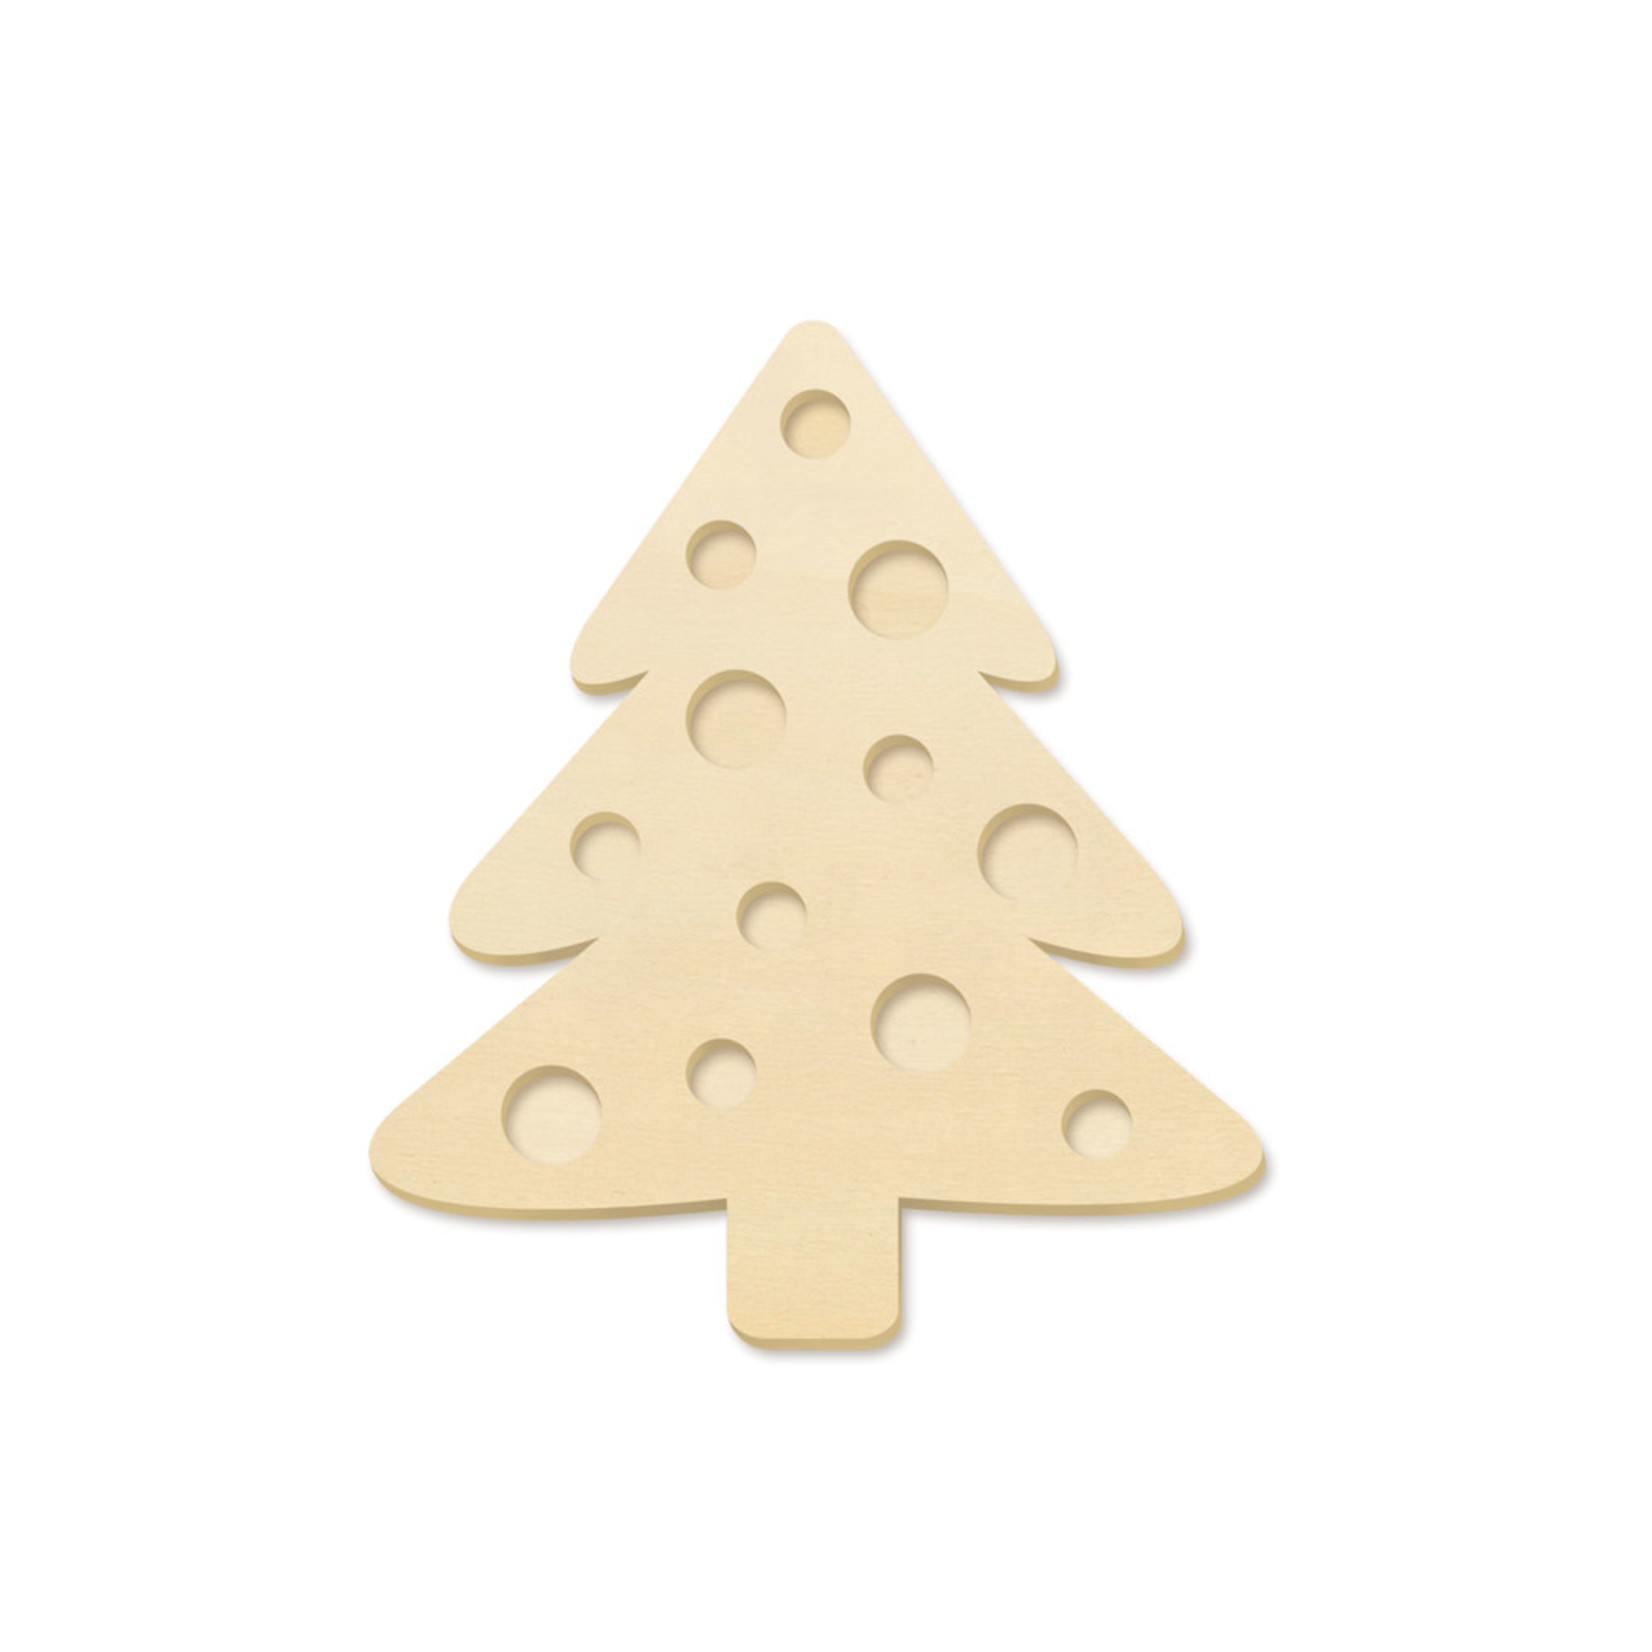 HOLIDAY WOOD: 10IN DIY PLAQUE 3D 7MM(T) C) TREE